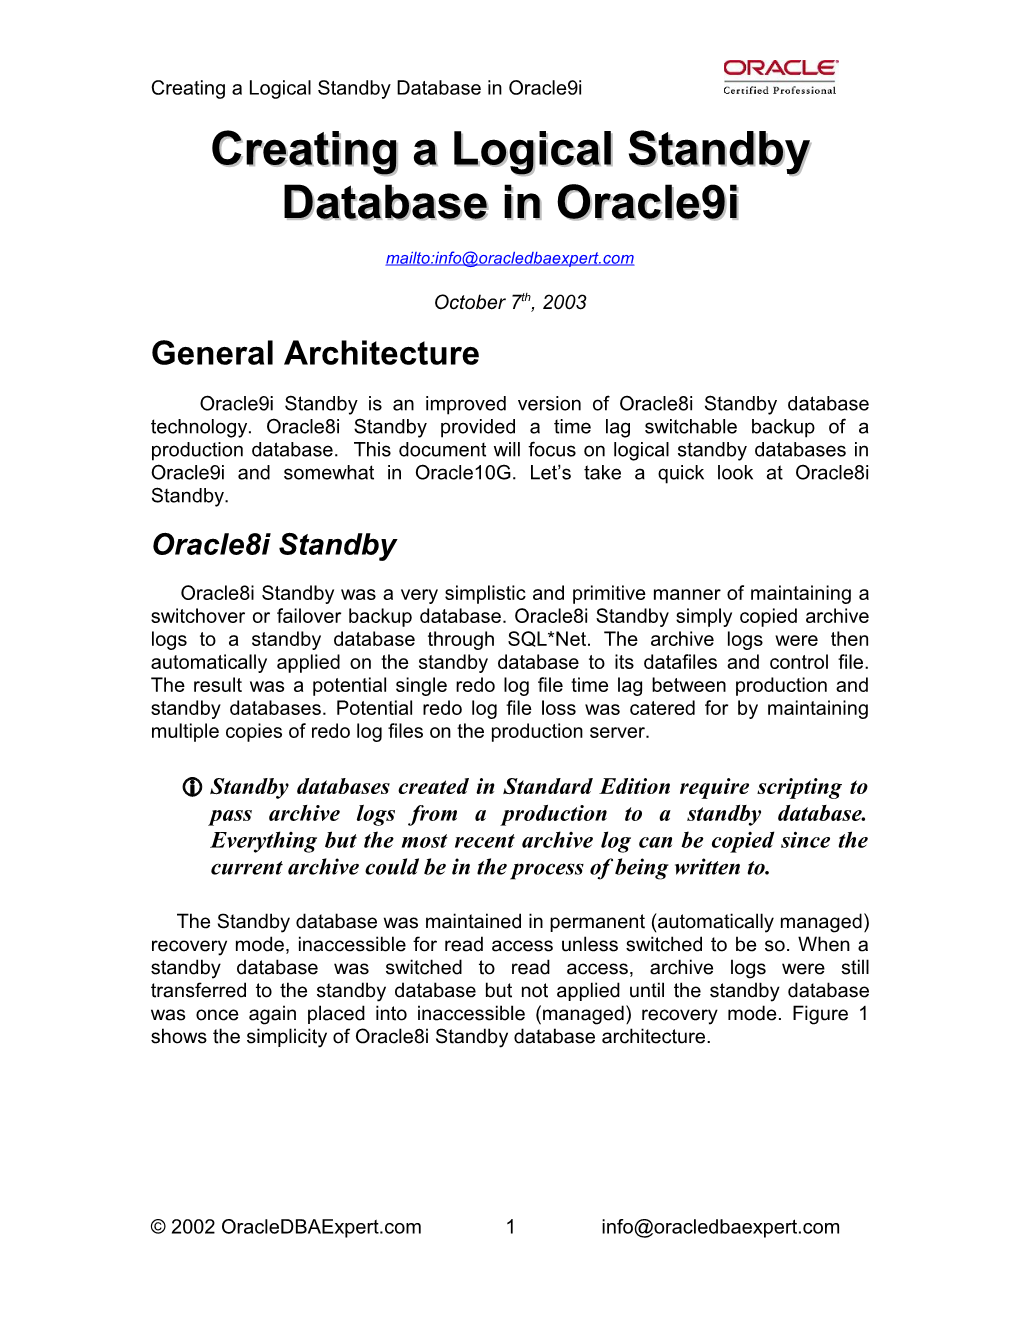 Creating a Logical Standby Database in Oracle9i